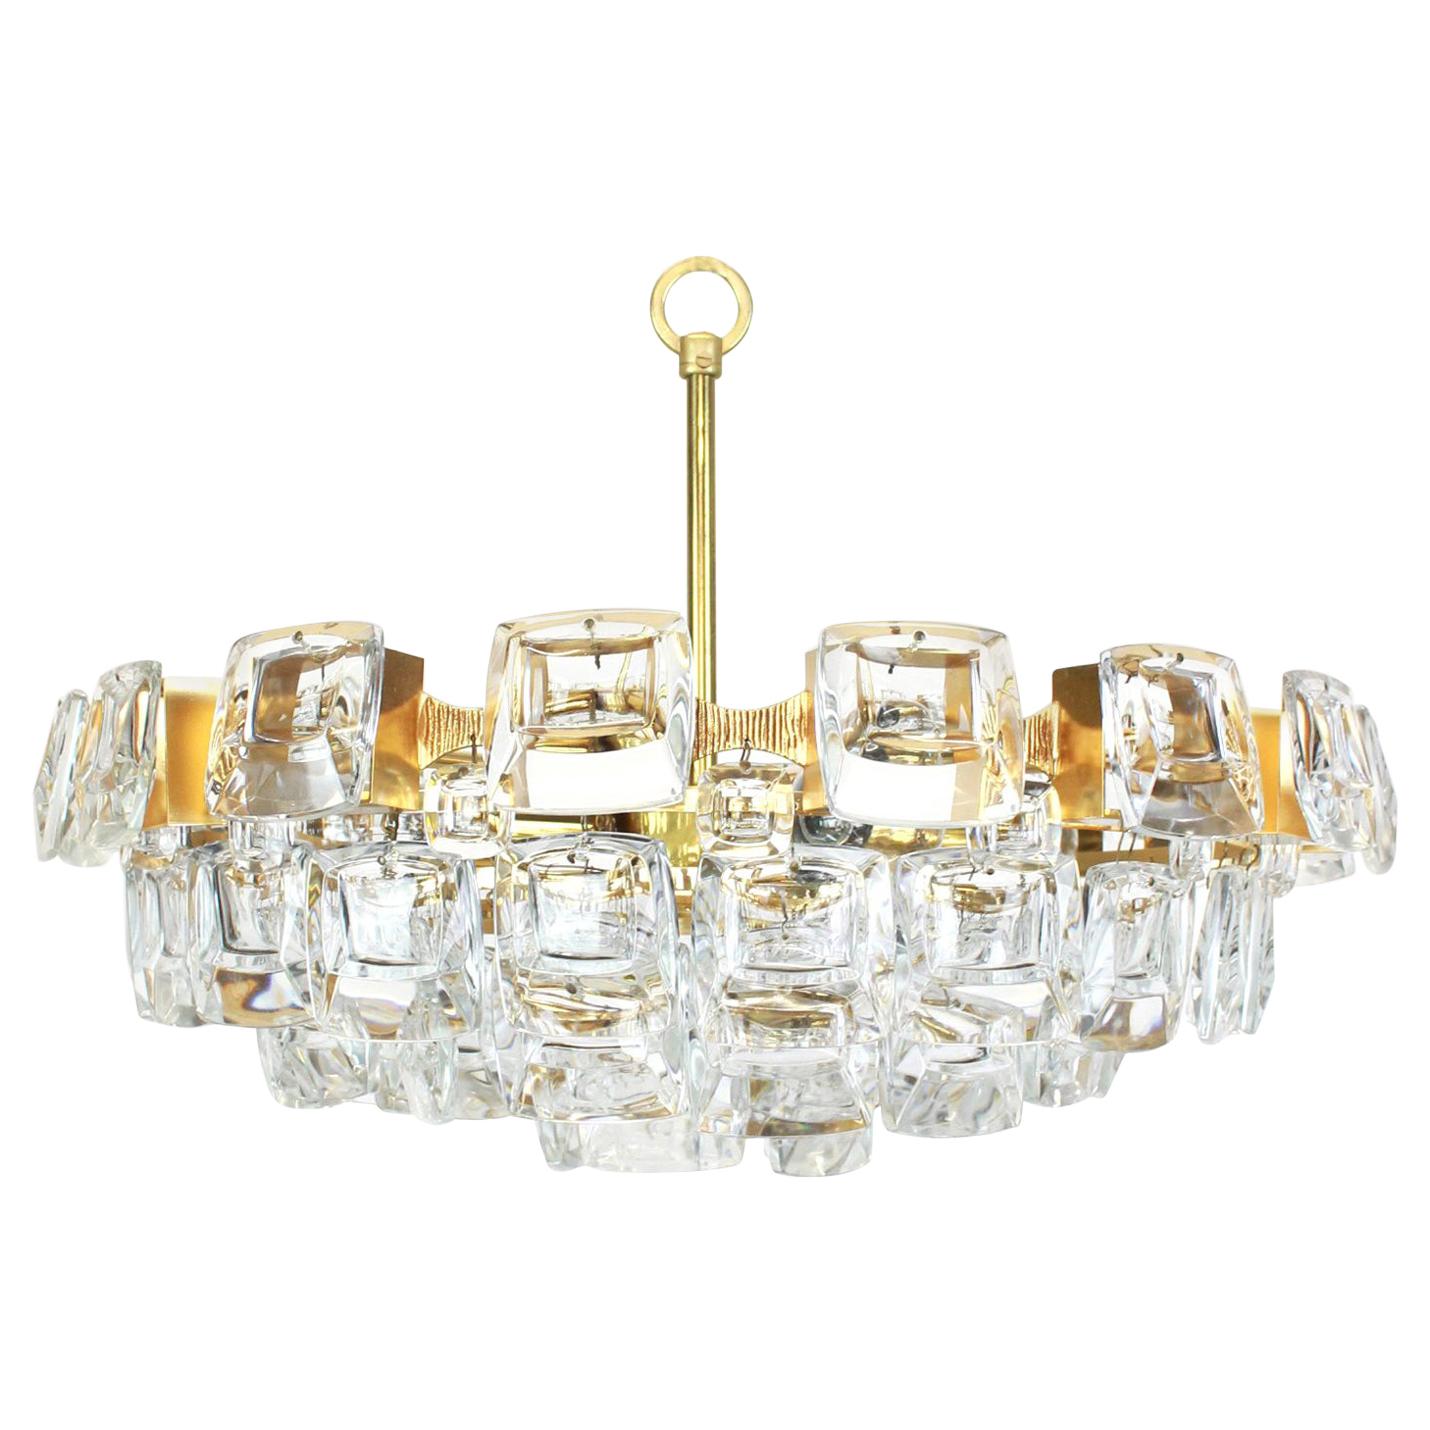 Large Gilt Brass and Crystal Glass Chandelier by Palwa, Germany, 1960s For Sale